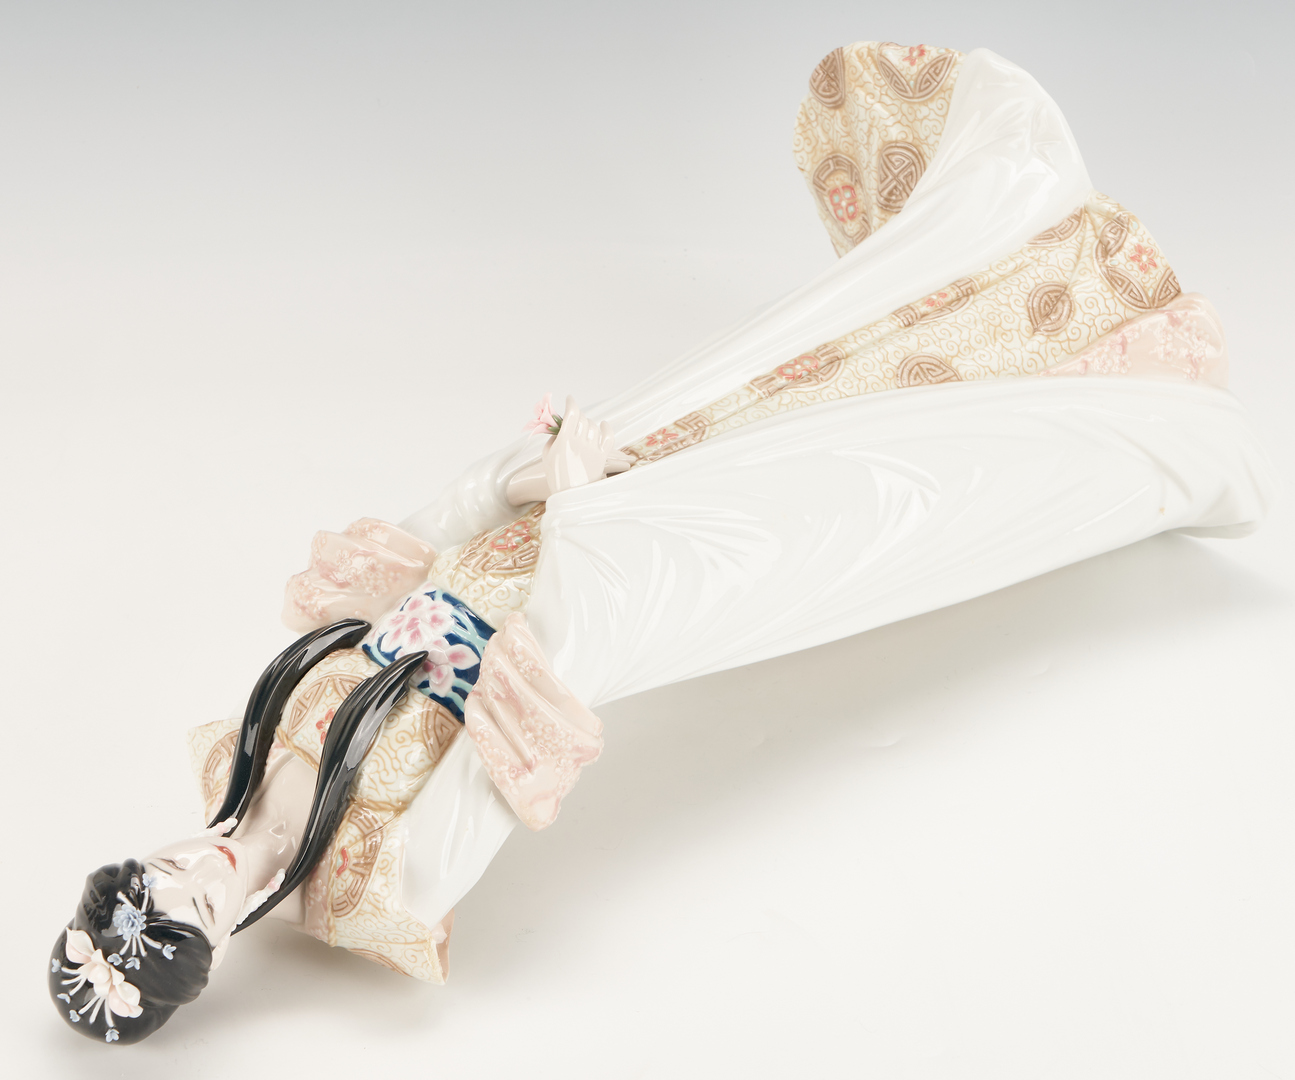 Lot 942: Limited Edition Lladro Porcelain Figure, Chinese Beauty